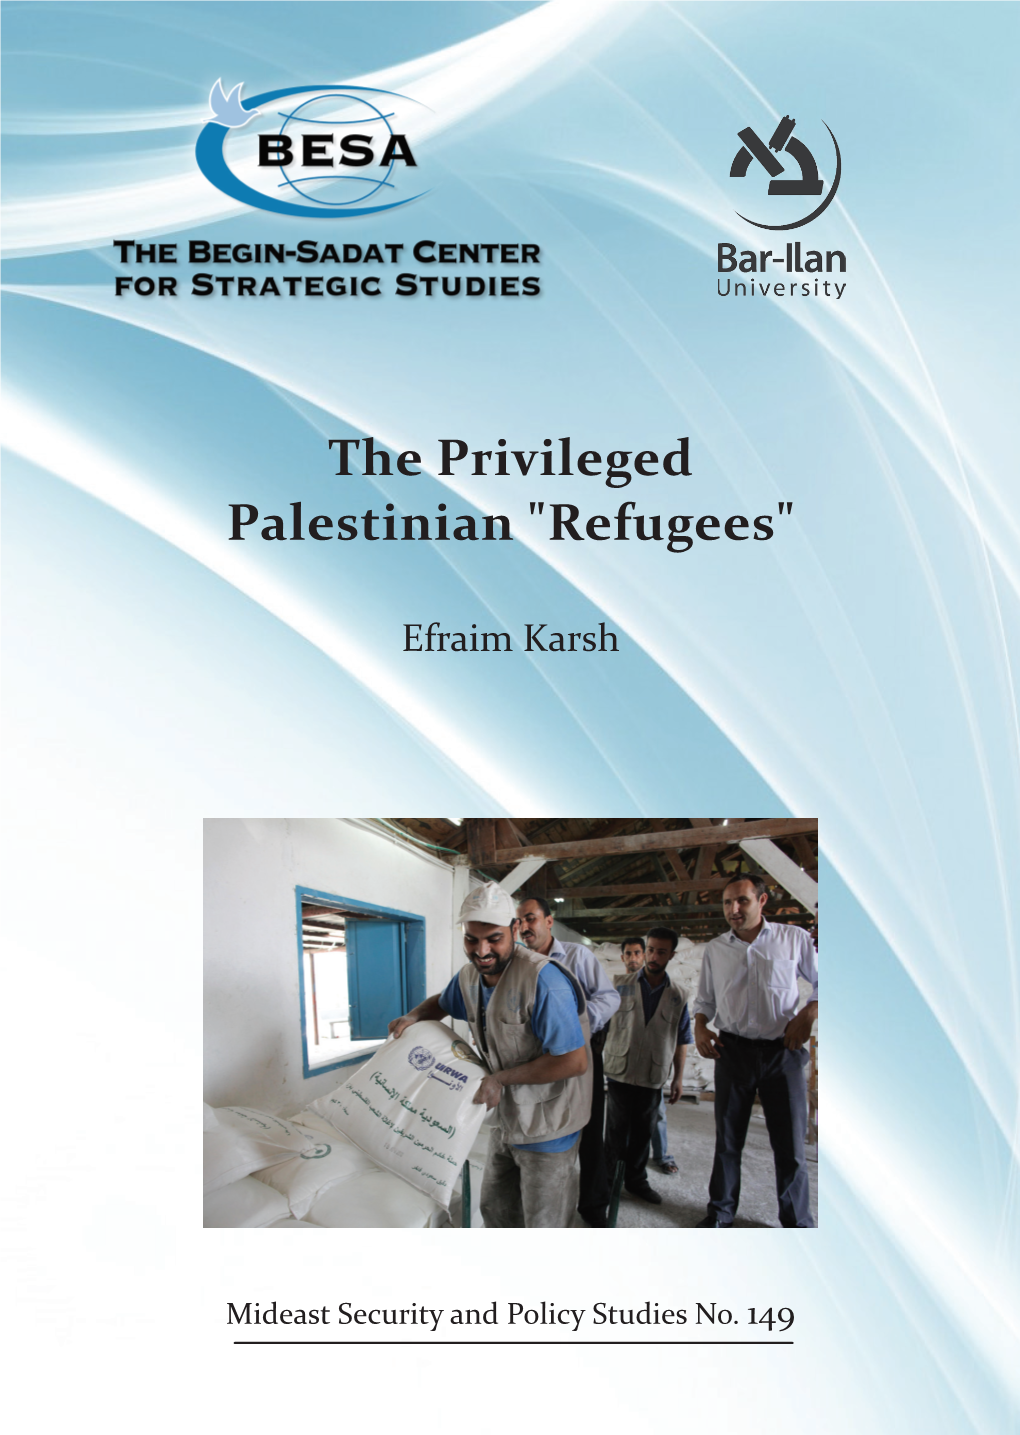 The Privileged Palestinian "Refugees"